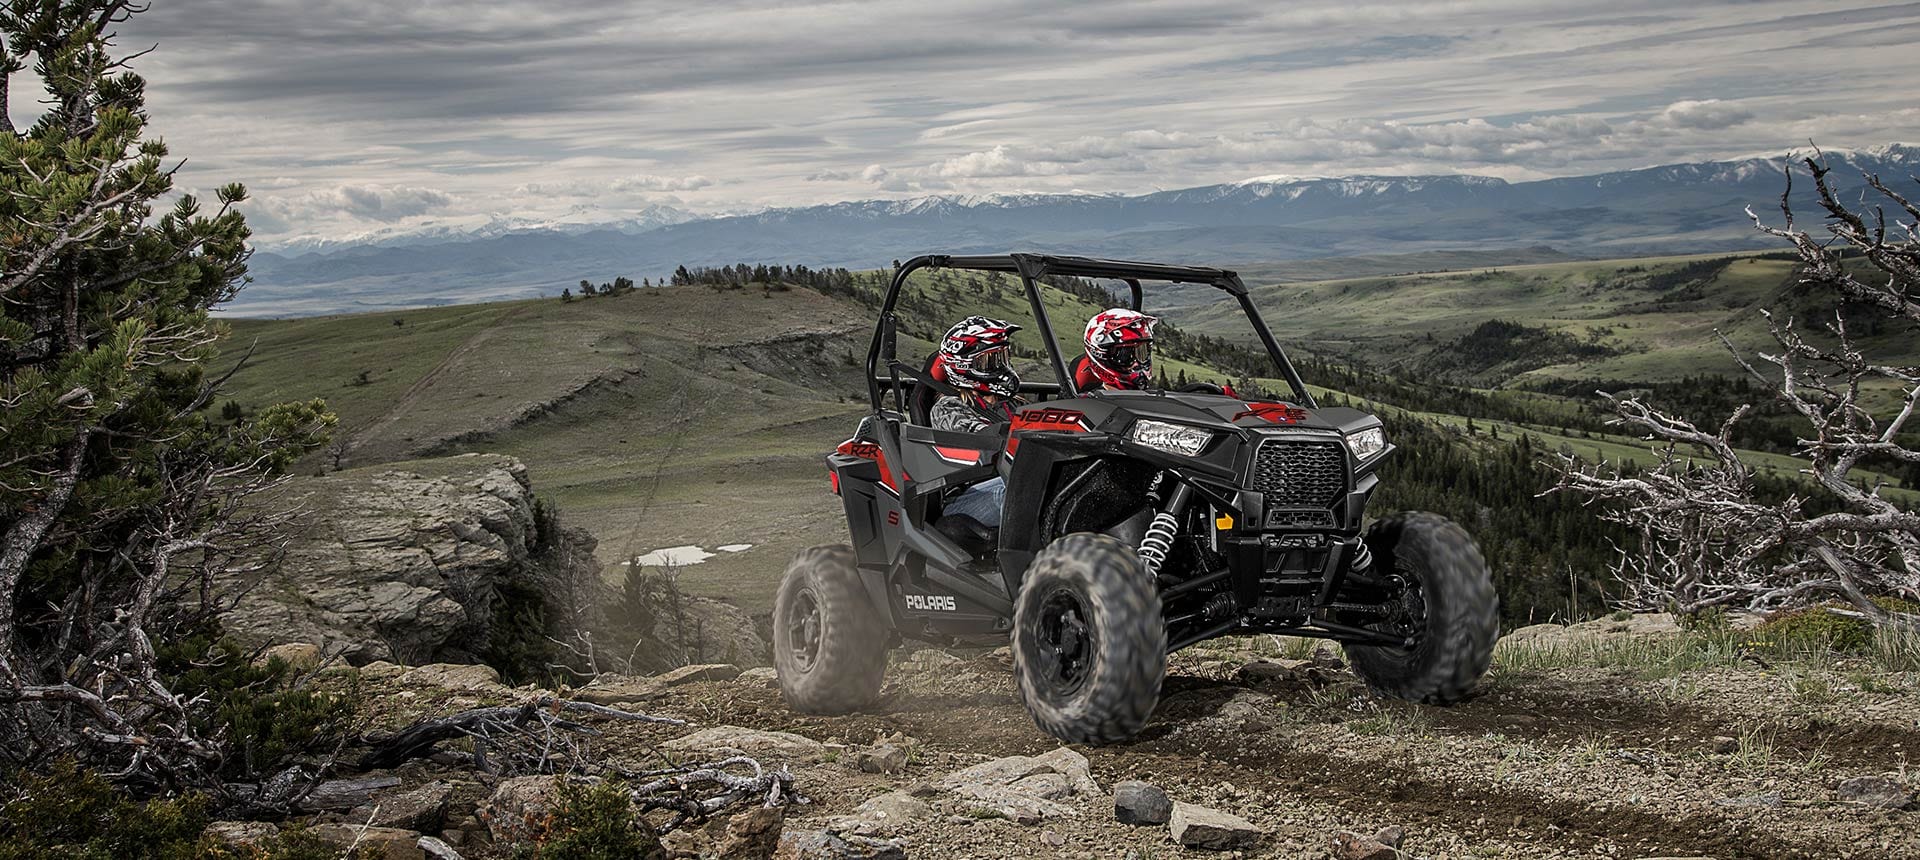 RZR S 1000 OFFROAD CAR